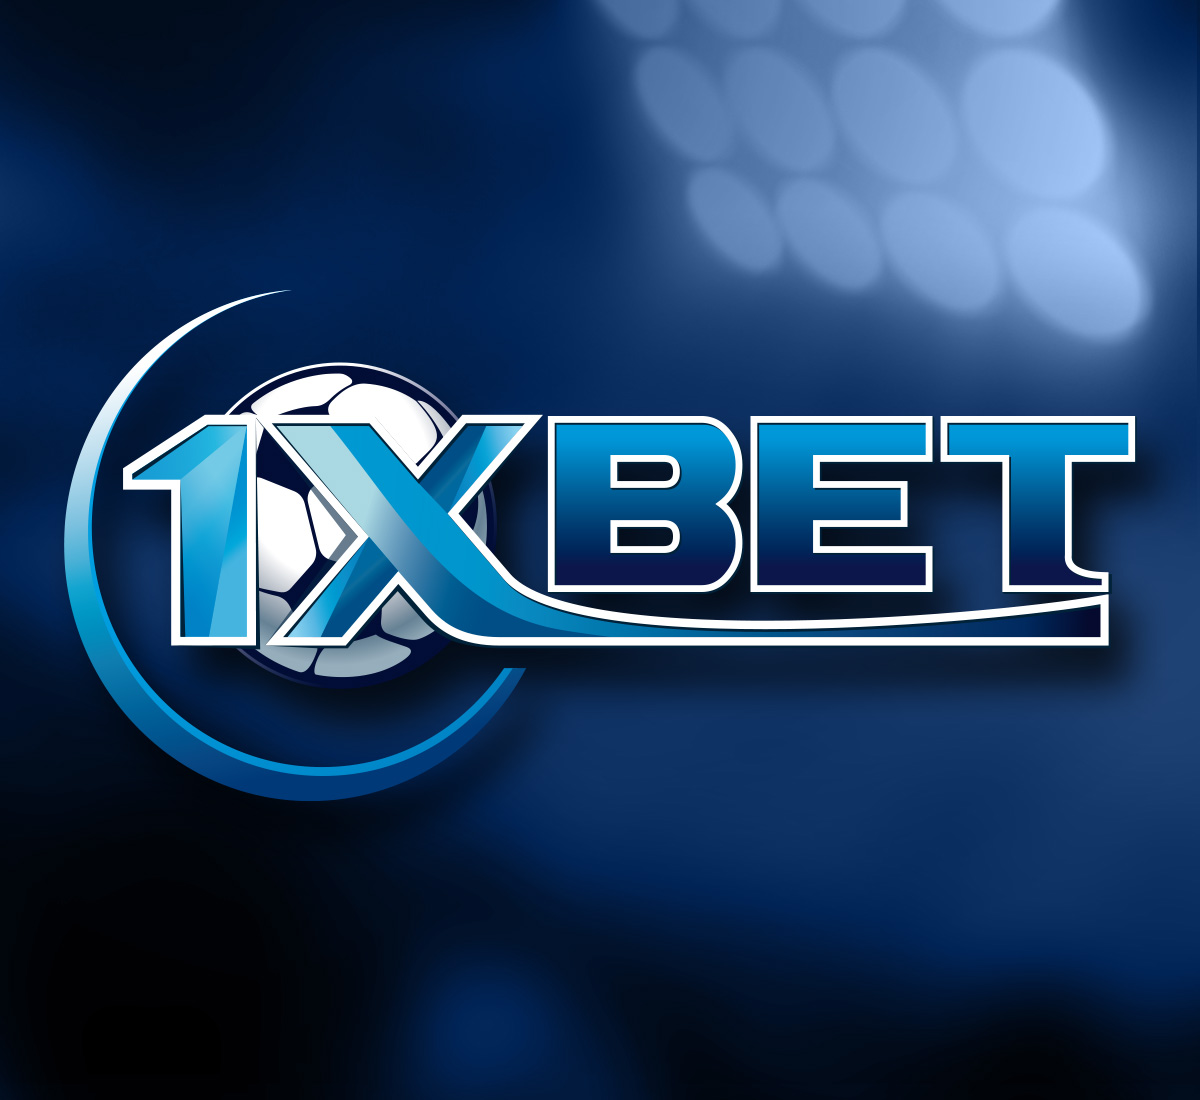 Android Application 1XBET